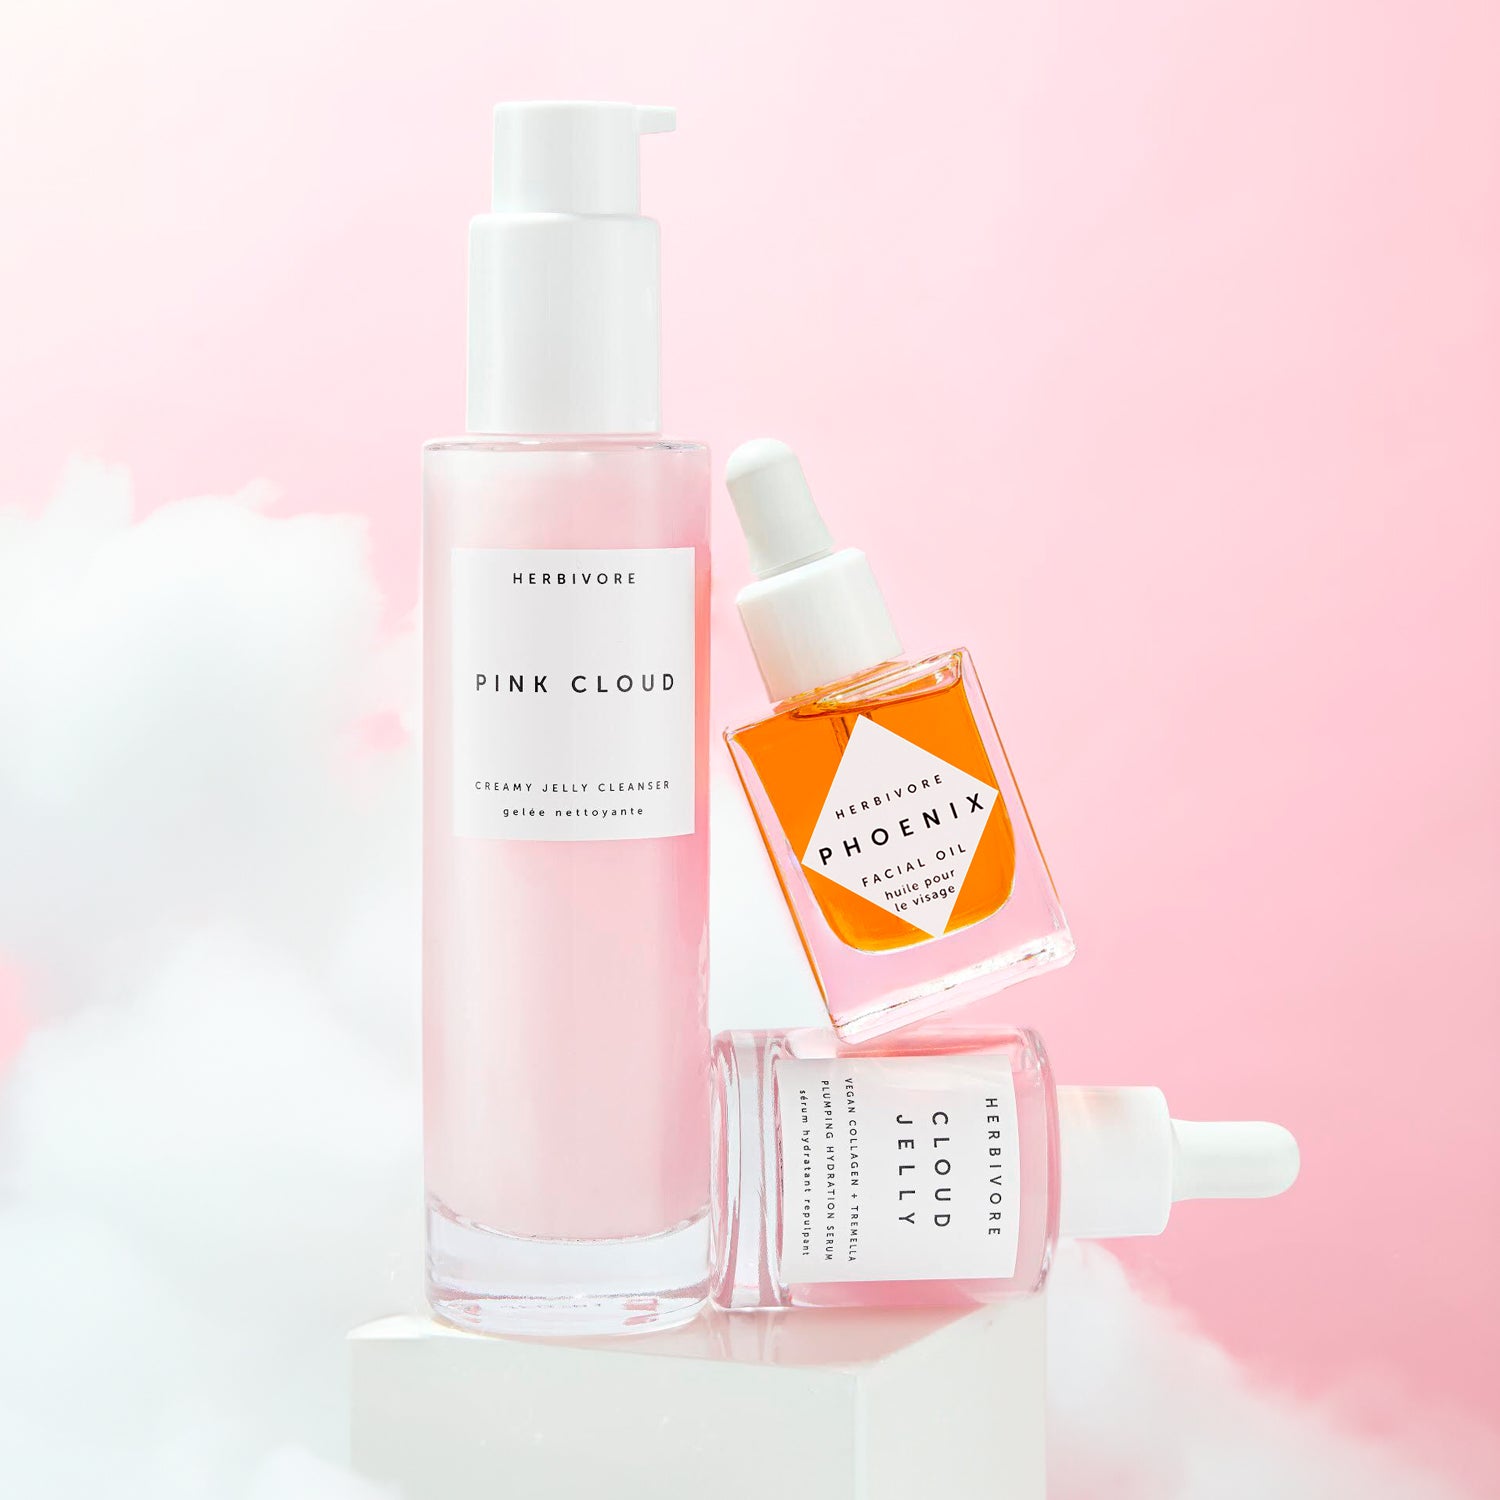 Pink Cloud Cleanser next to a stacked mid-size Phoenix Face Oil on a sideways Cloud Jelly Serum with white clouds and pink background